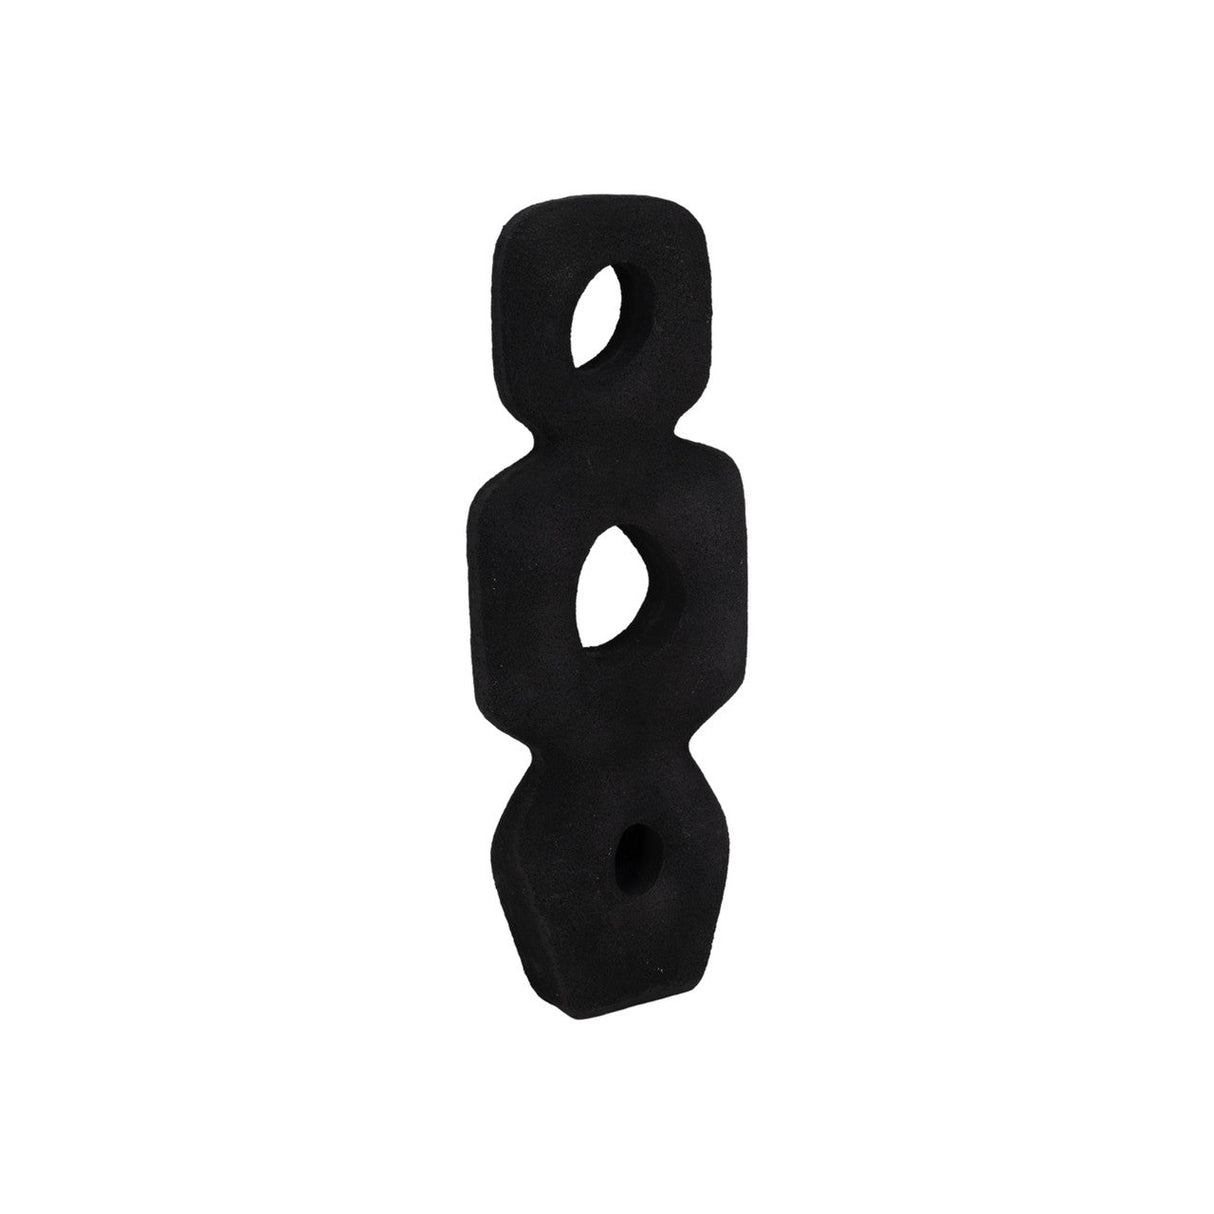 15" Textured Open Cut-out Totem Object, Black